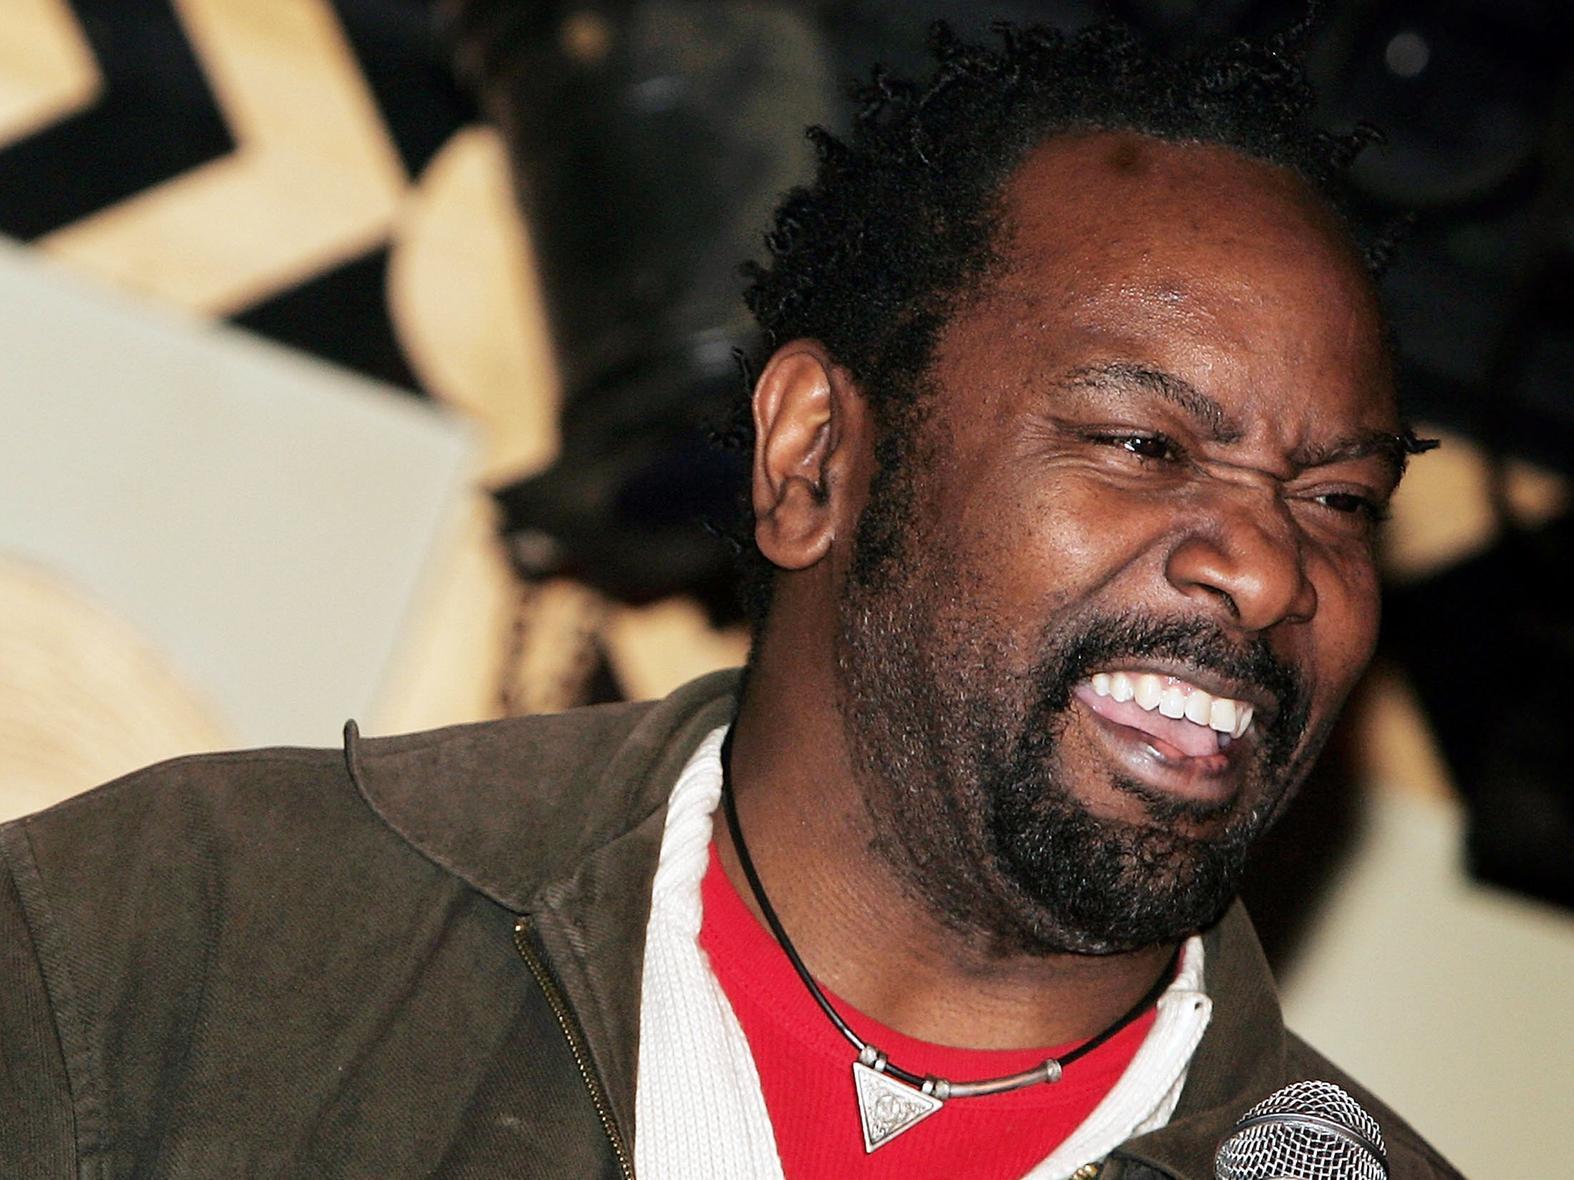 Joel and Dan also will be joined by popular American comedian Reginald D Hunter.